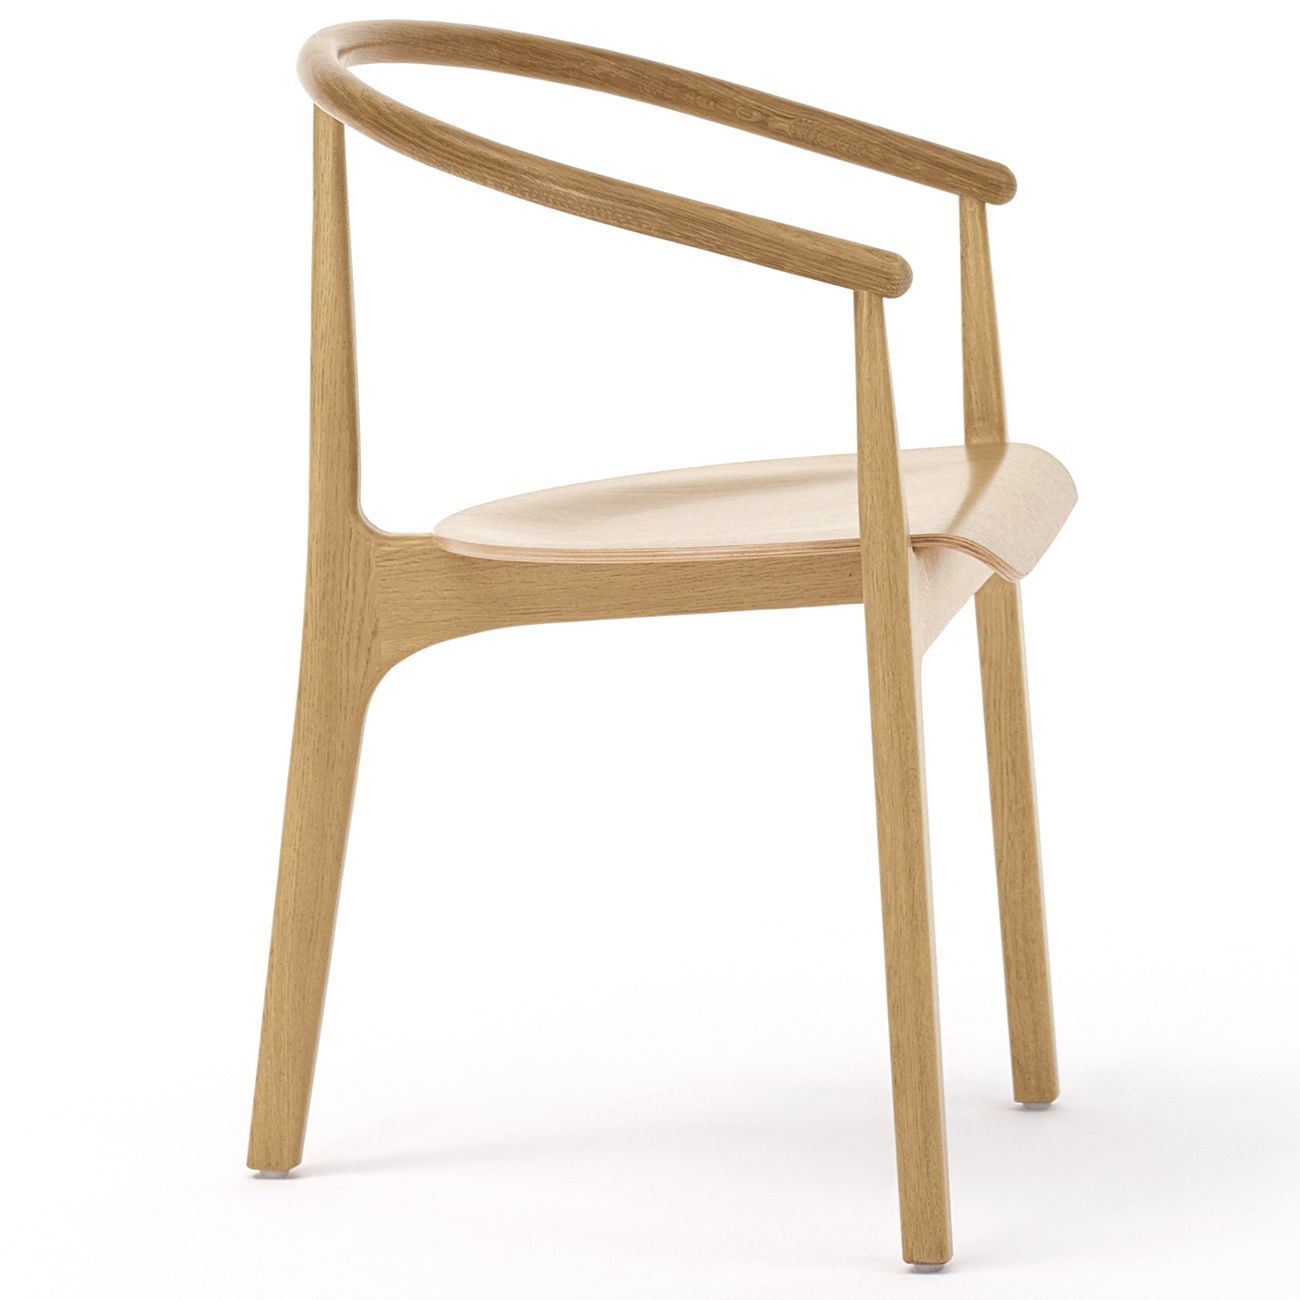 Chair B-2940 EVO by Paged